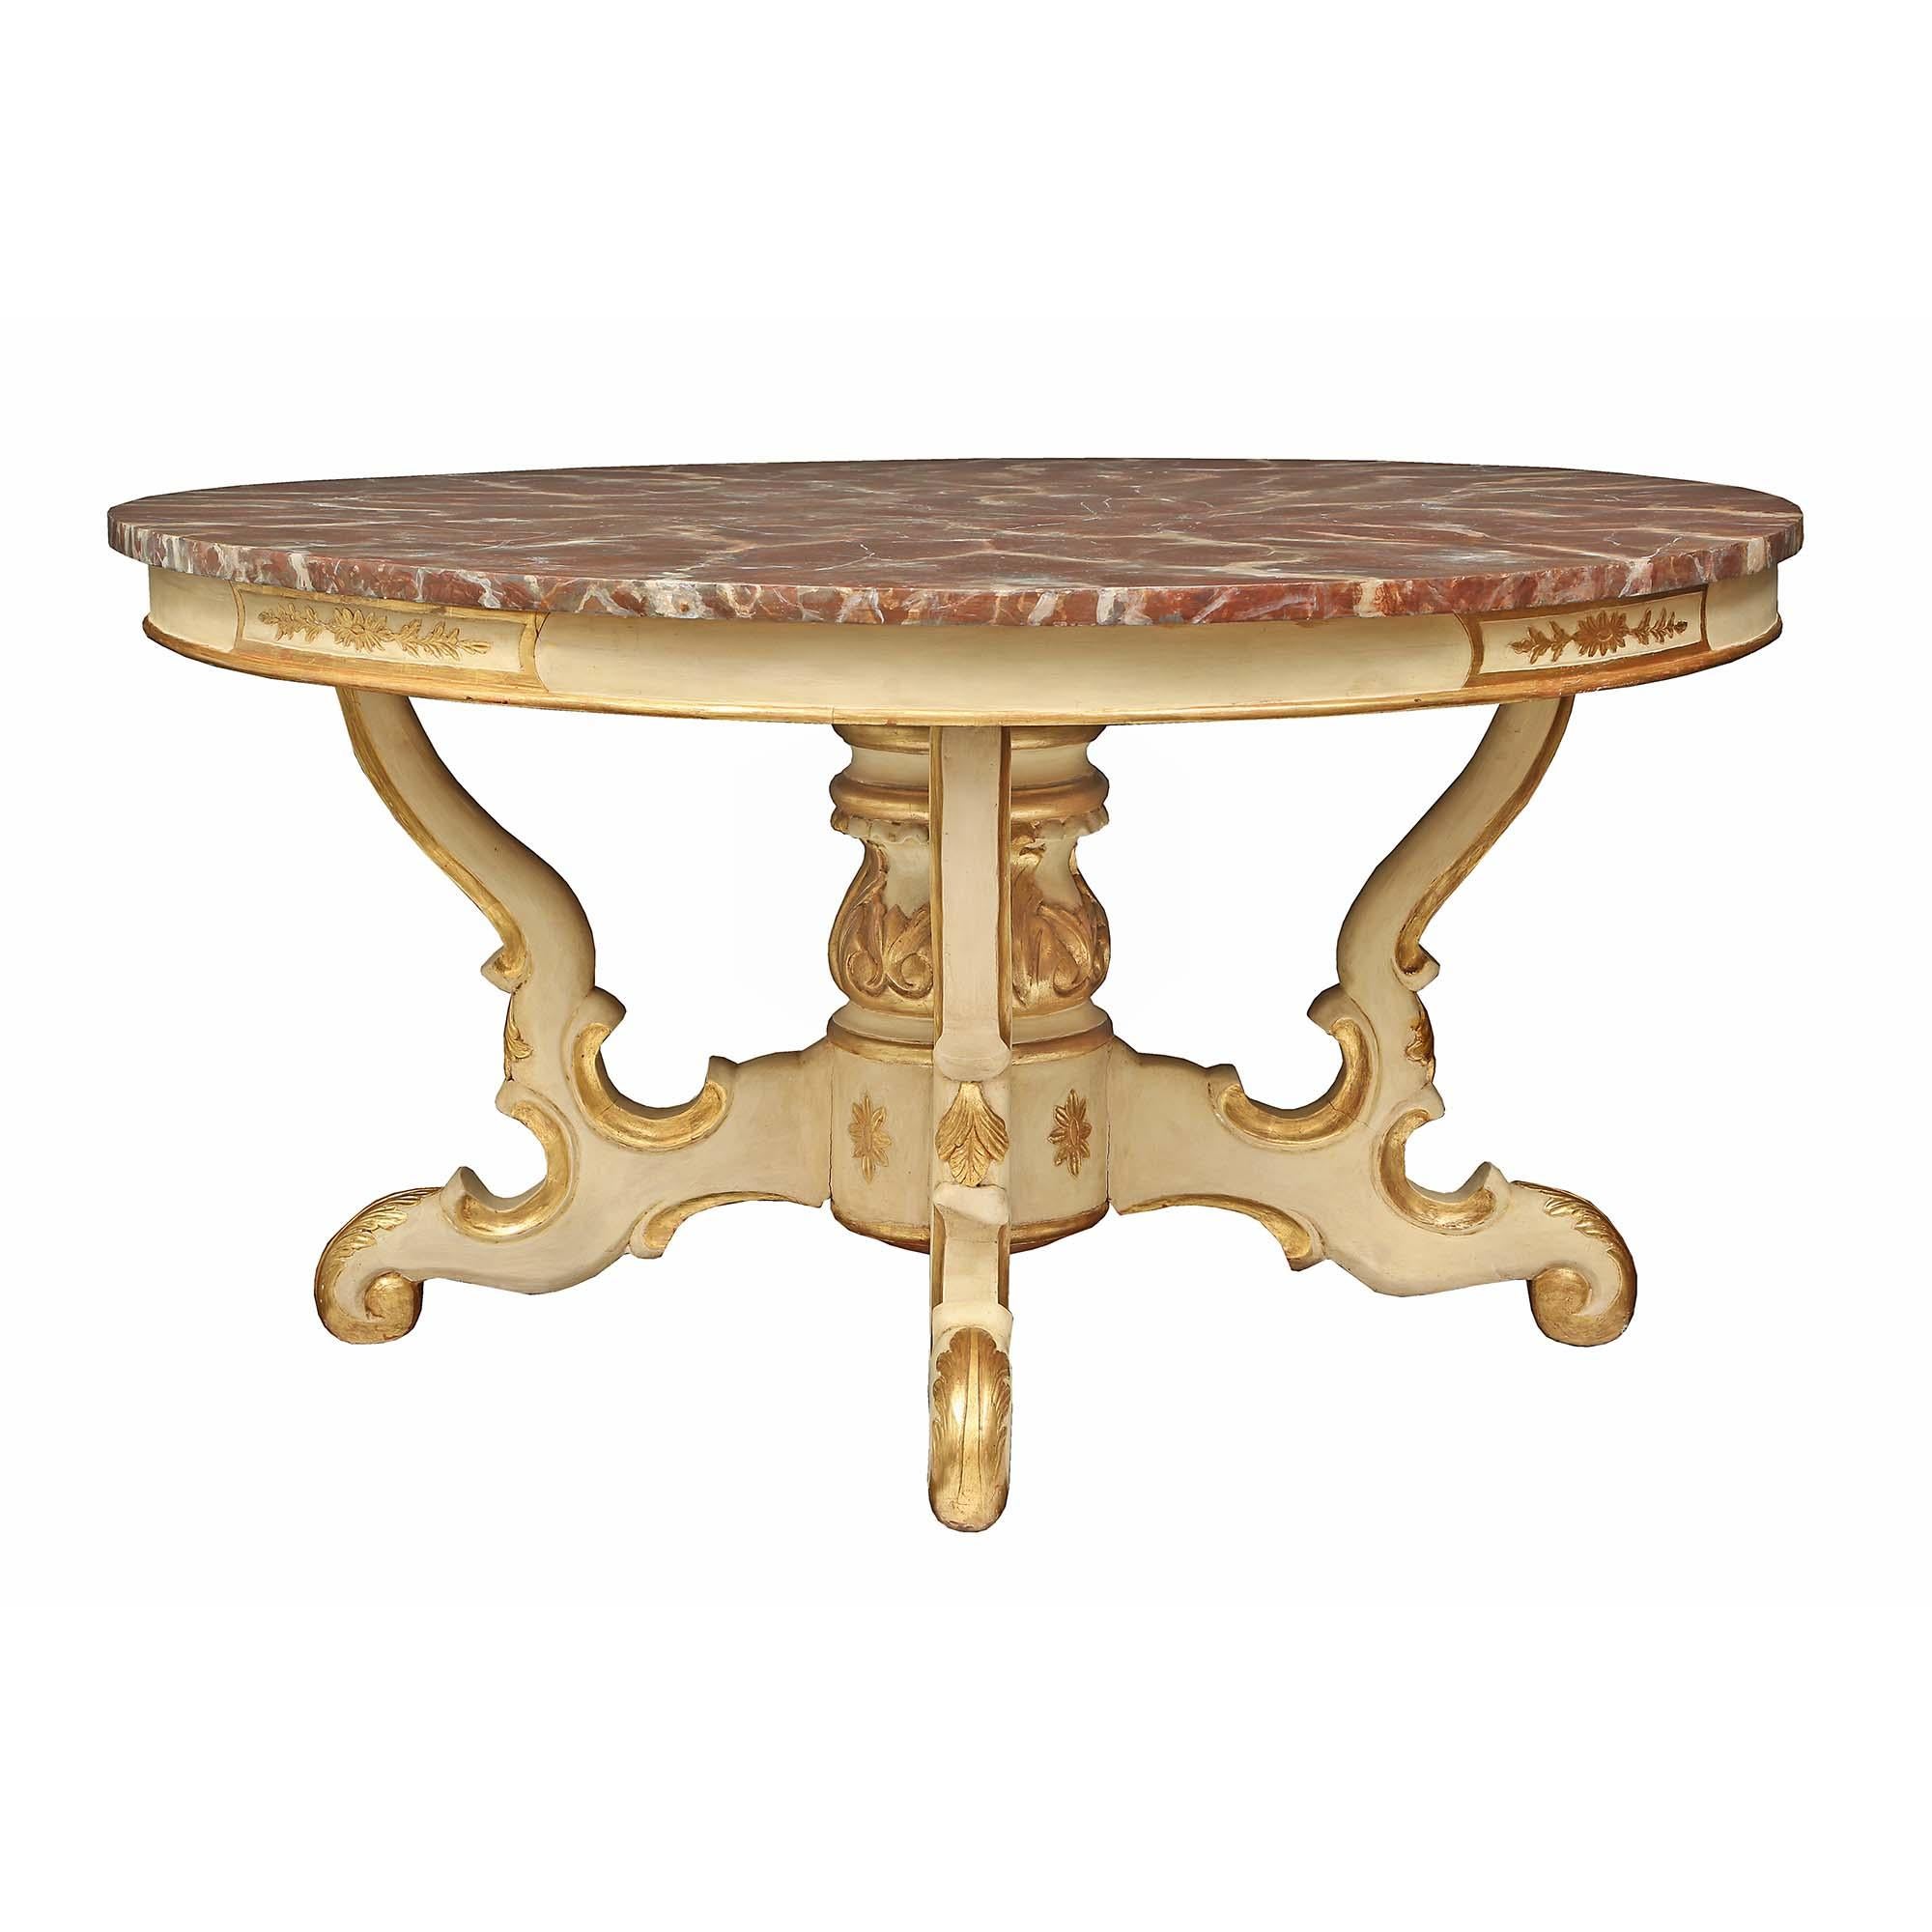 An extremely decorative and large scale Italian 19th century patinated and gilt center table. The table is raised by four elegant scrolled patinated legs with fine gilt trim and rosettes. The central pedestal support is decorated with large gilt